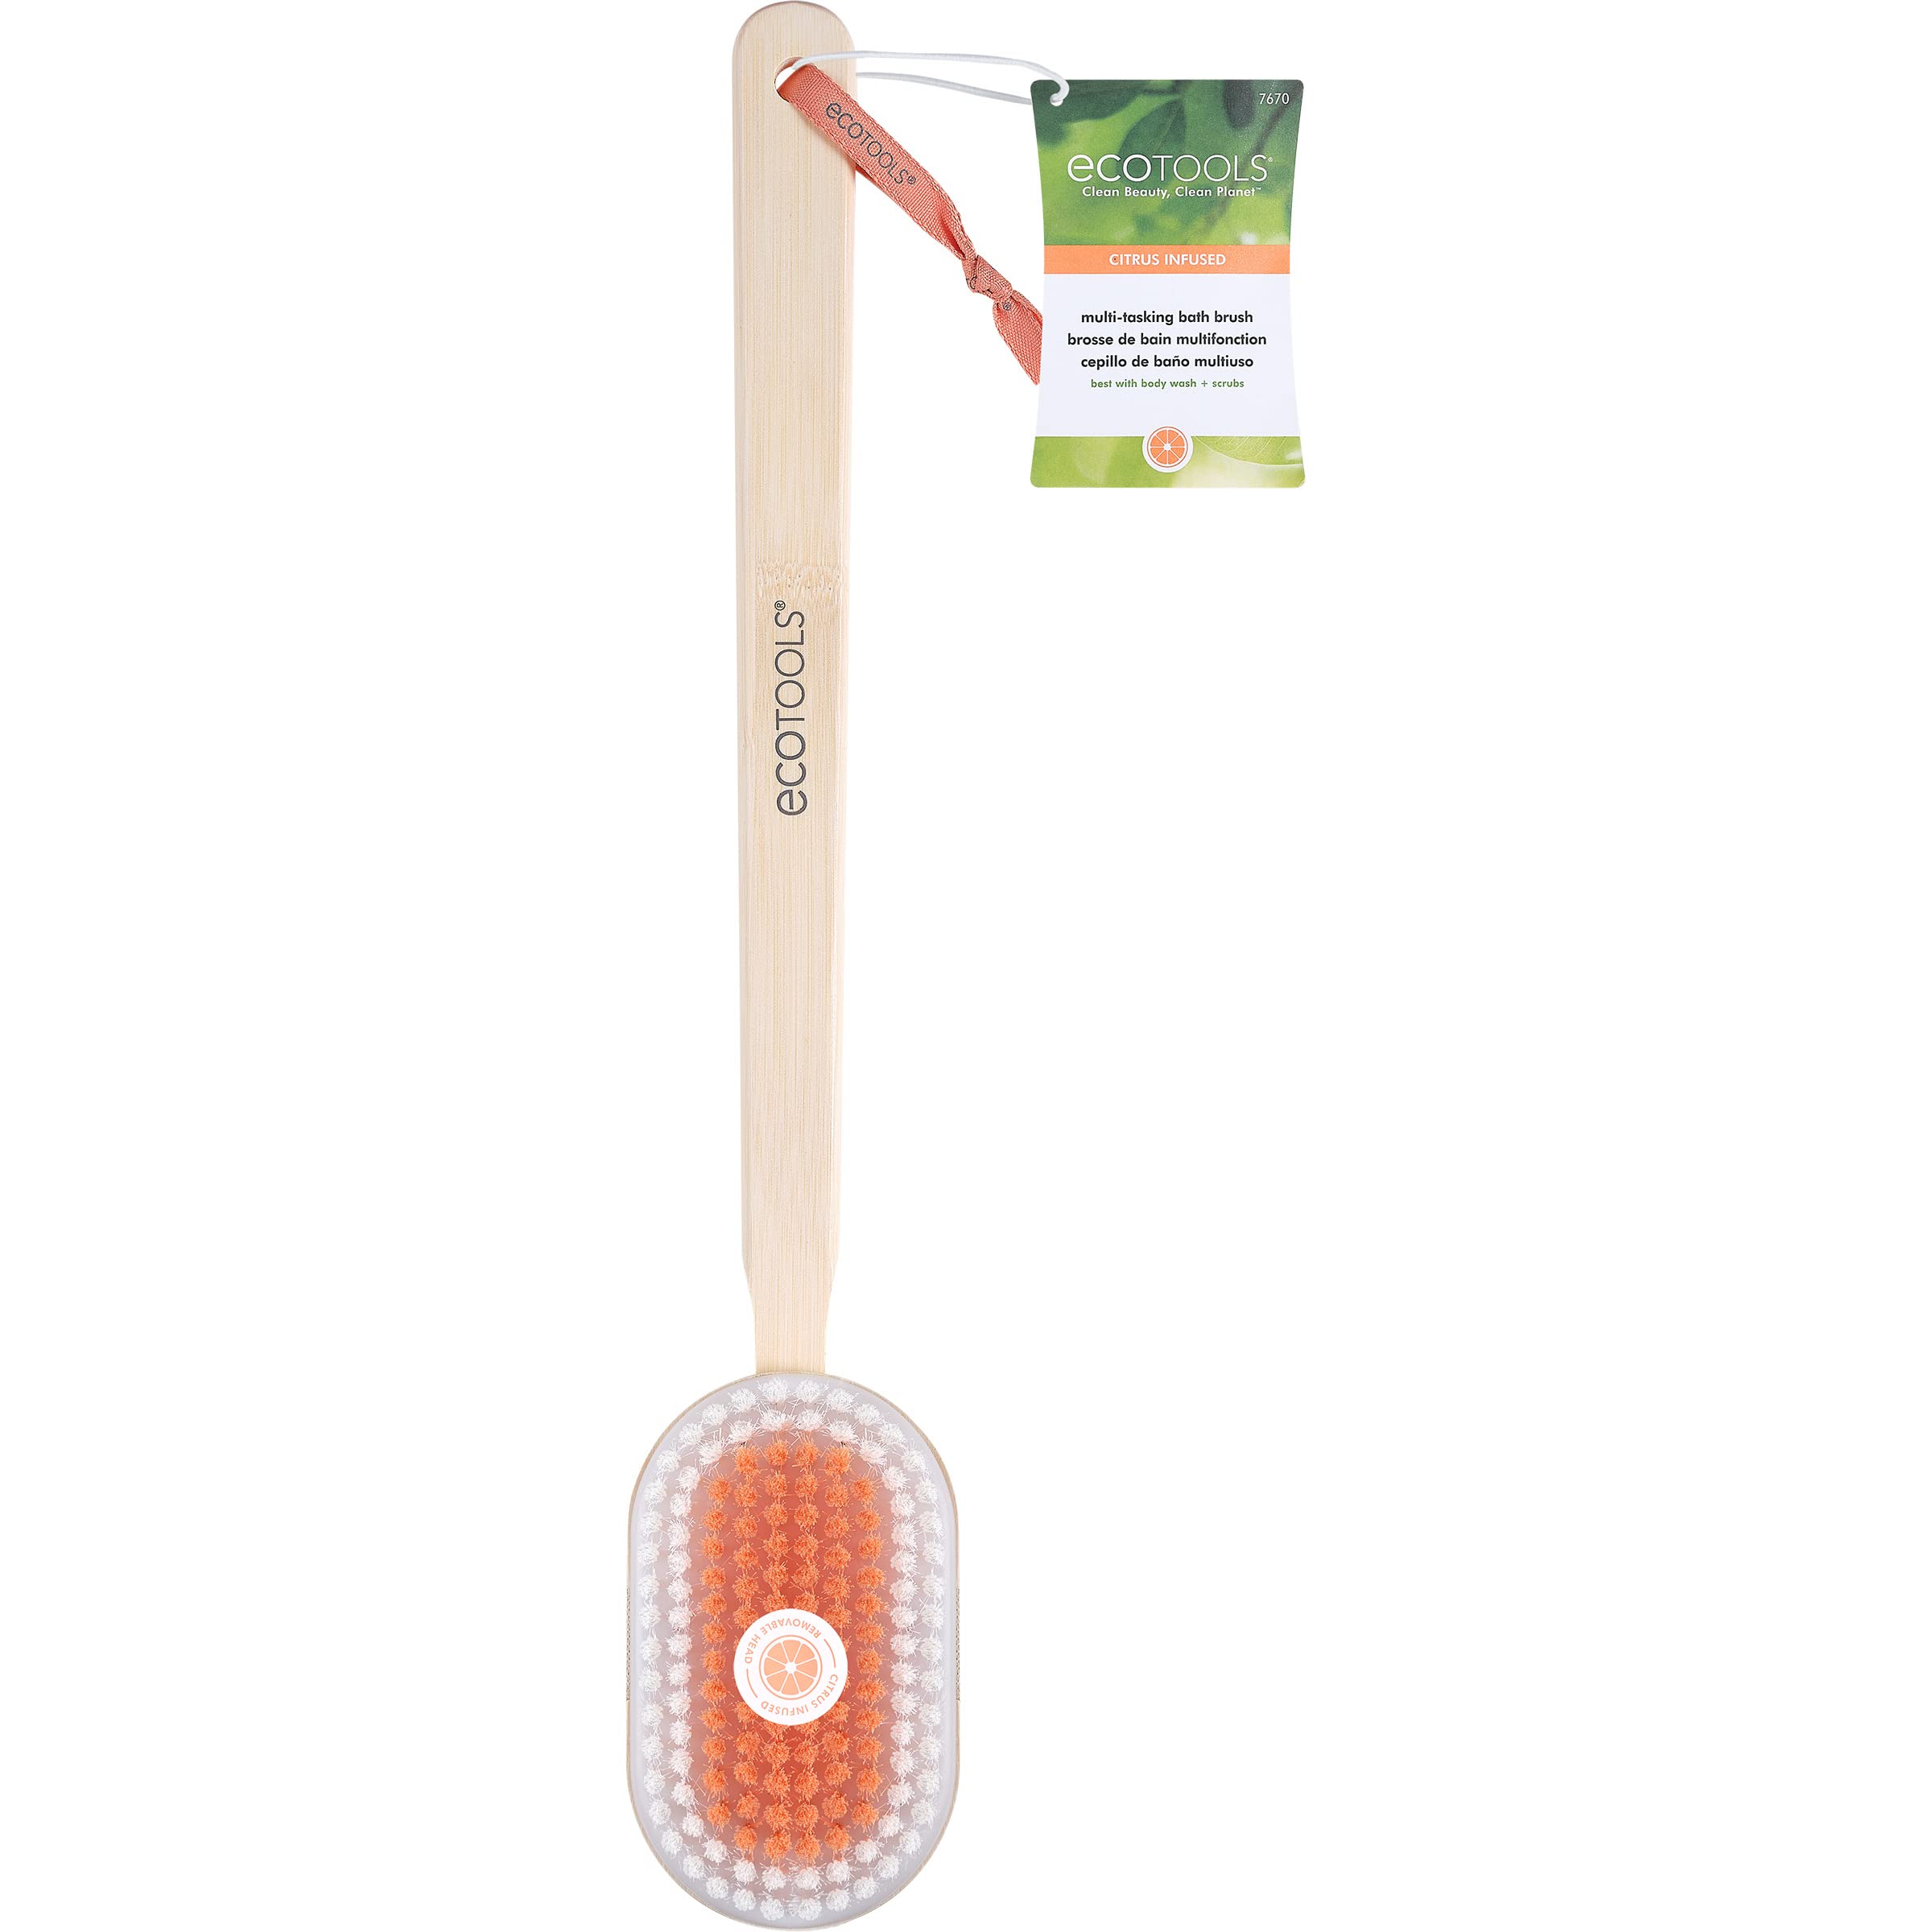 EcoTools Multi-Tasking Bath Brush, Citrus Infused Shower Brush with, Long Ergonomic Handle, Back Scrubber, Exfoliating Bath Brush, Cleanses Hard to Reach Areas, Refreshing Clean, 1 Count